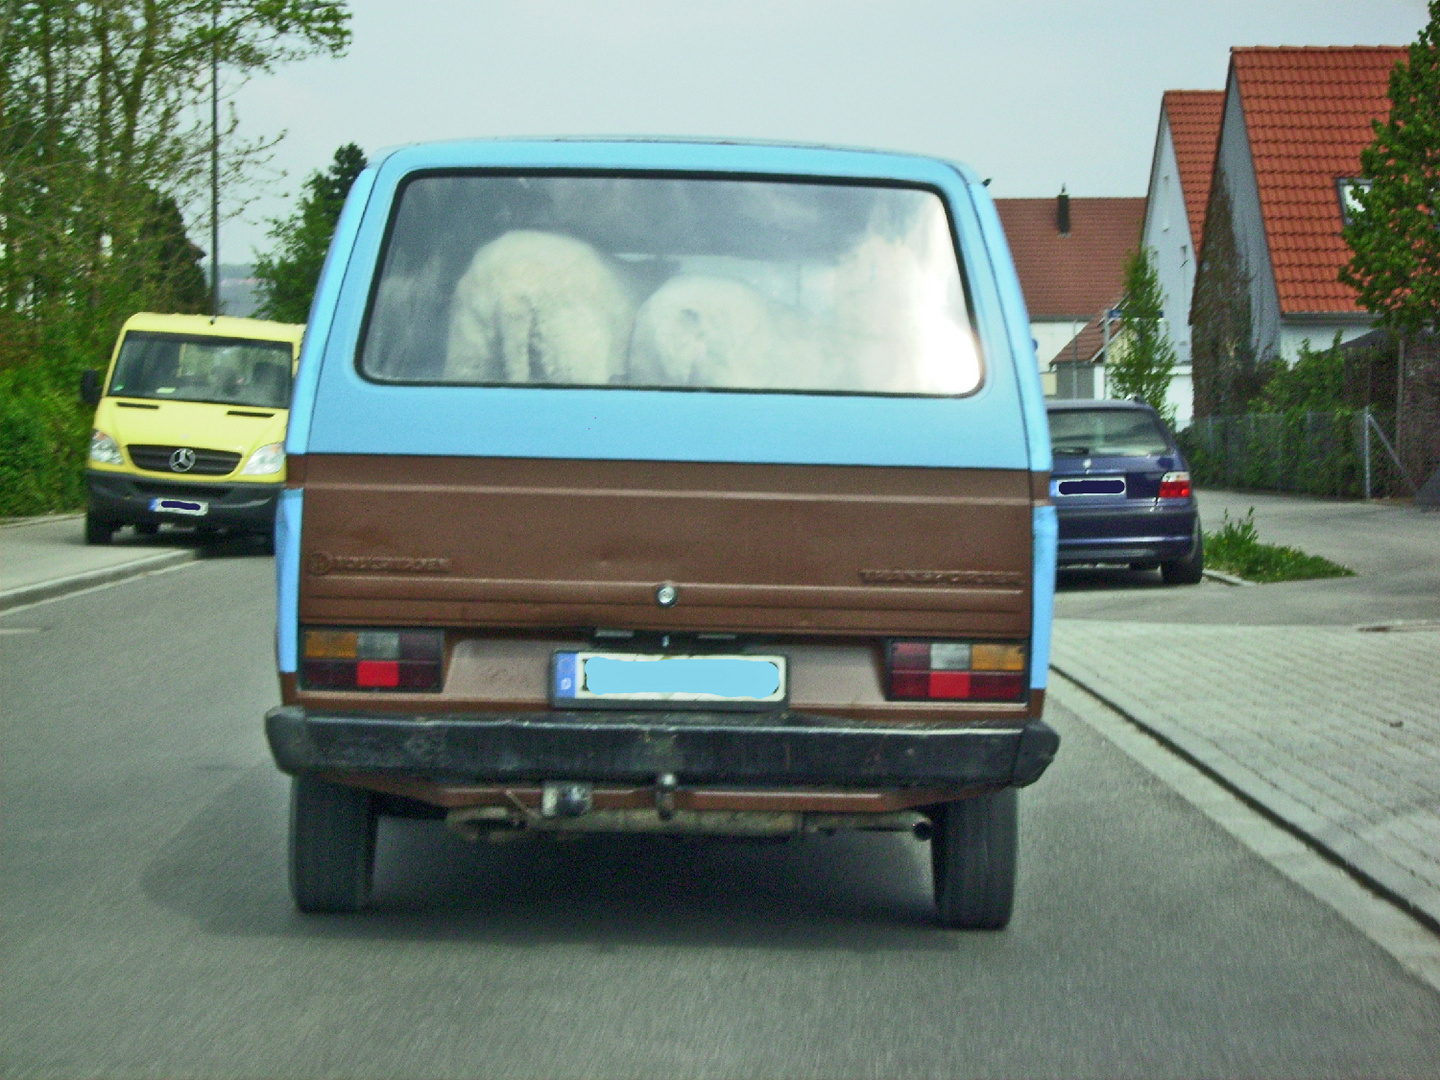 Sheep On The Road ...